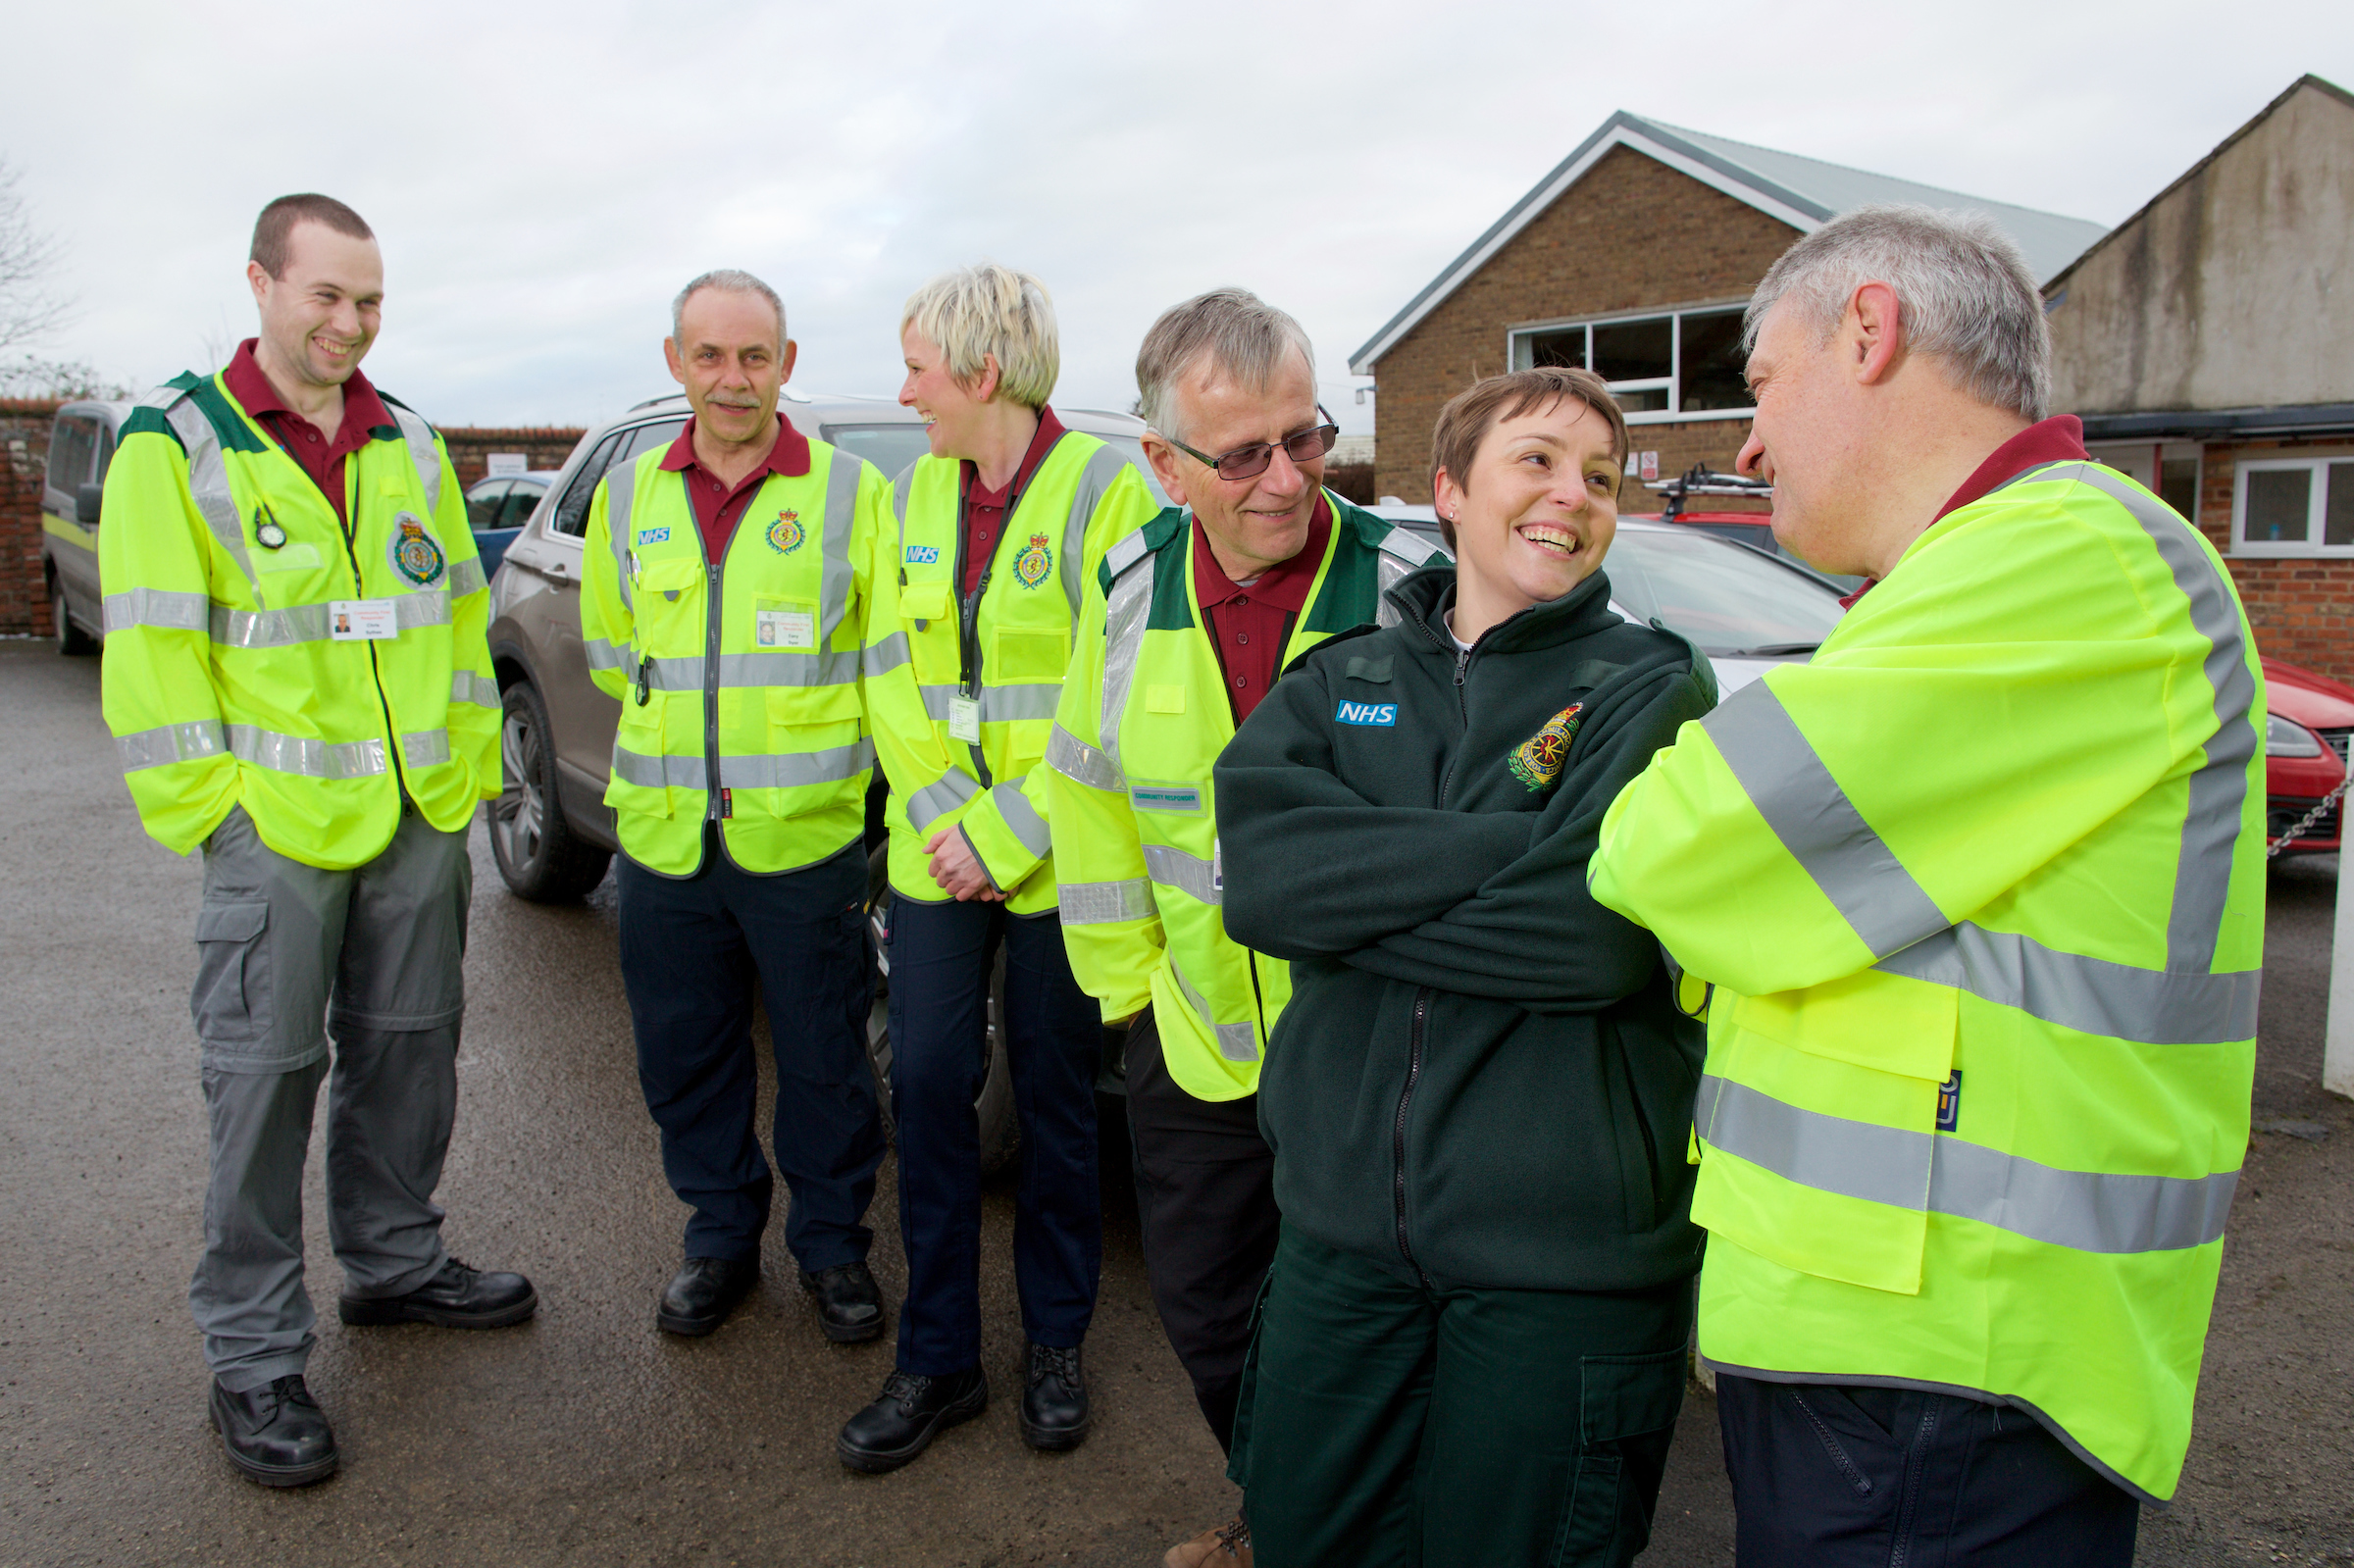 Yorkshire Ambulance Service NHS Trust is calling for new volunteers to become Community First Responders (CFRs) in Bridlington.